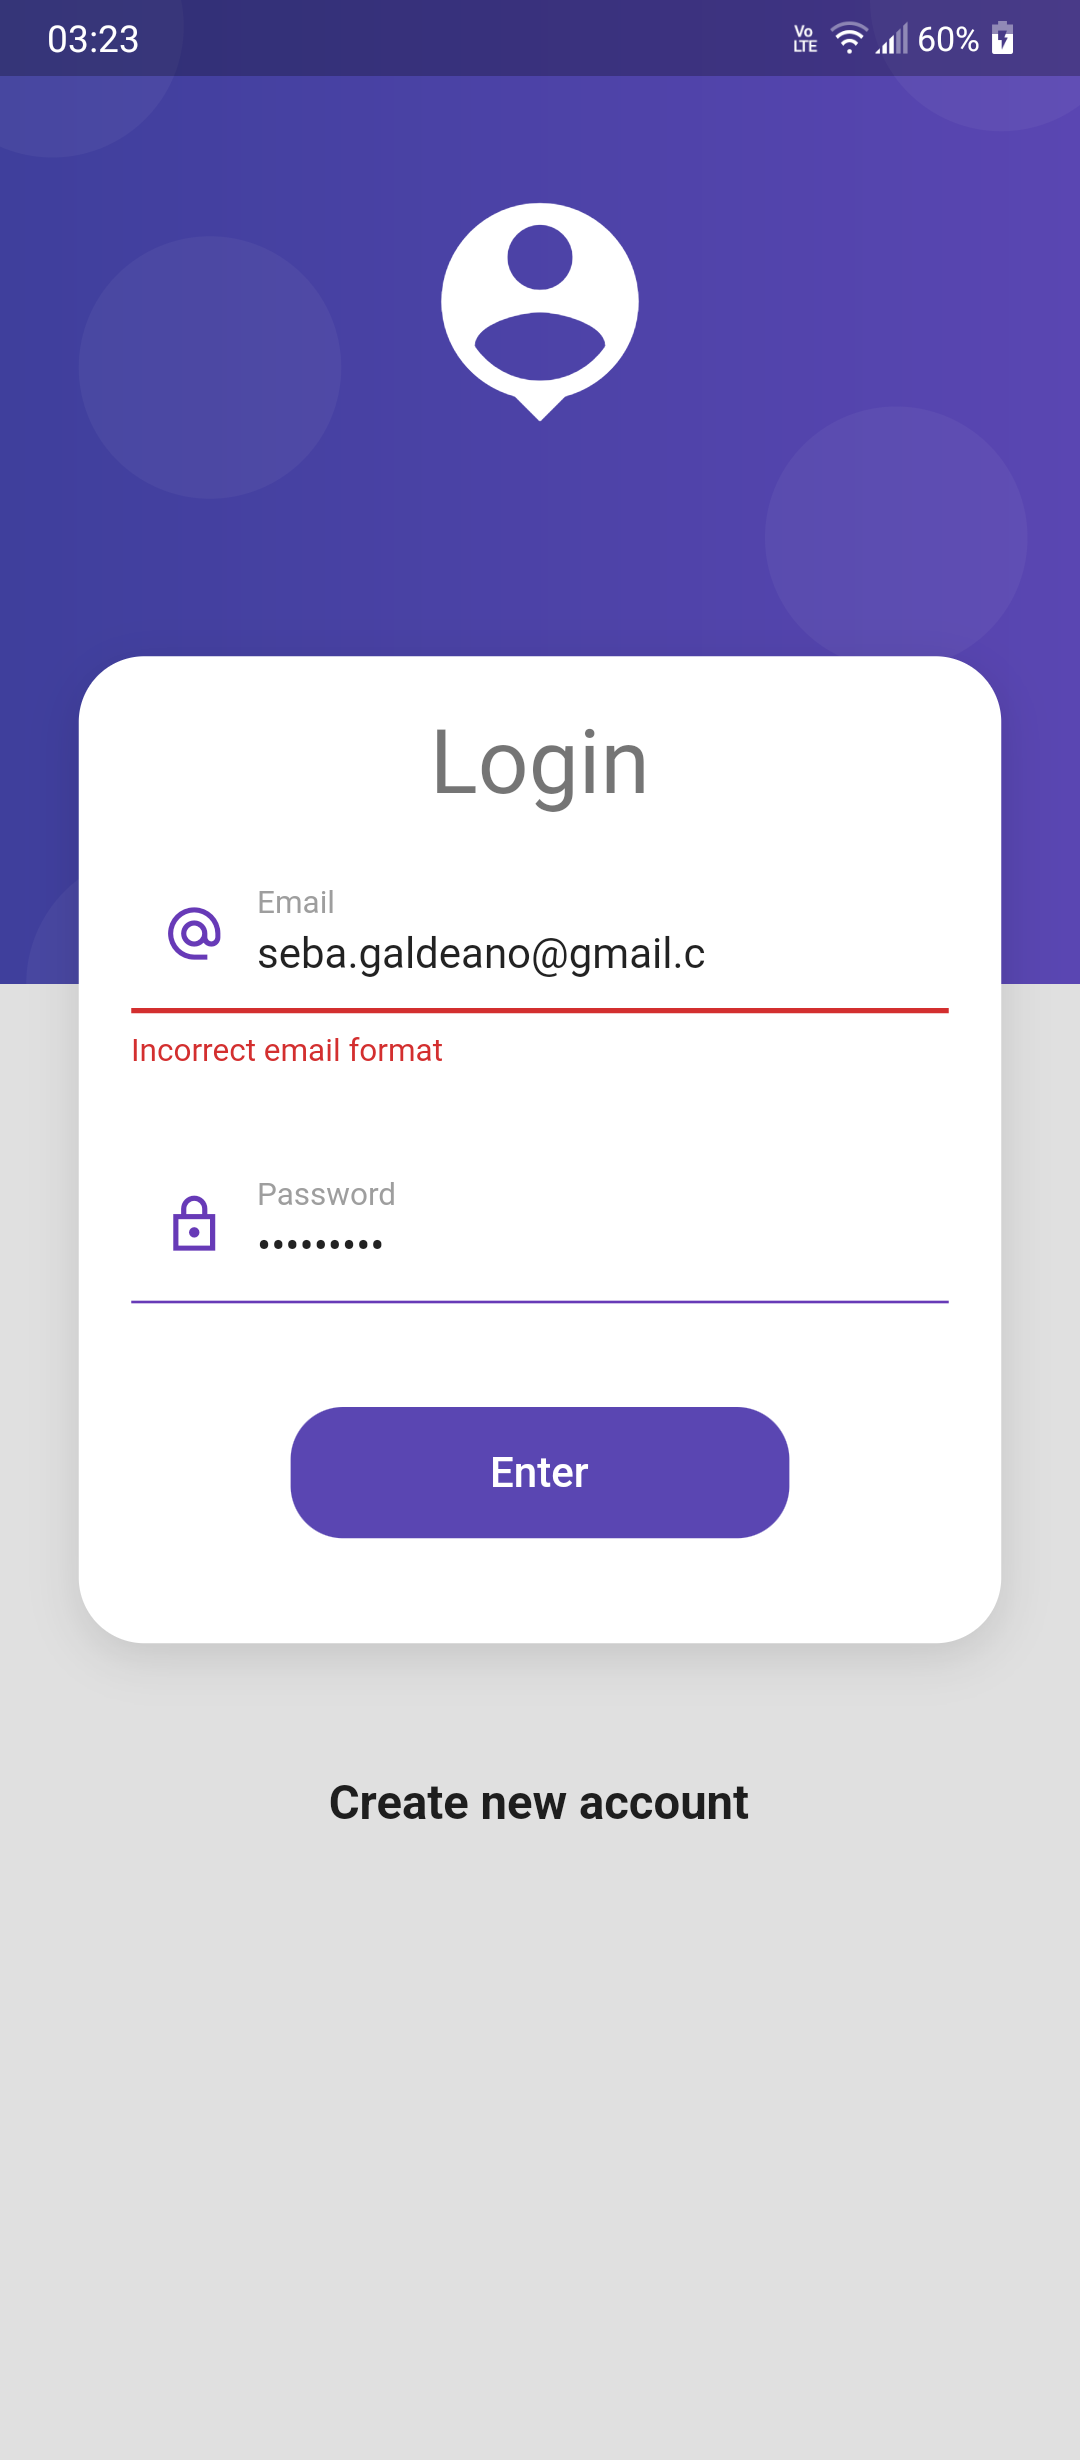 Flutter application that implements a complete login screen with fields validations